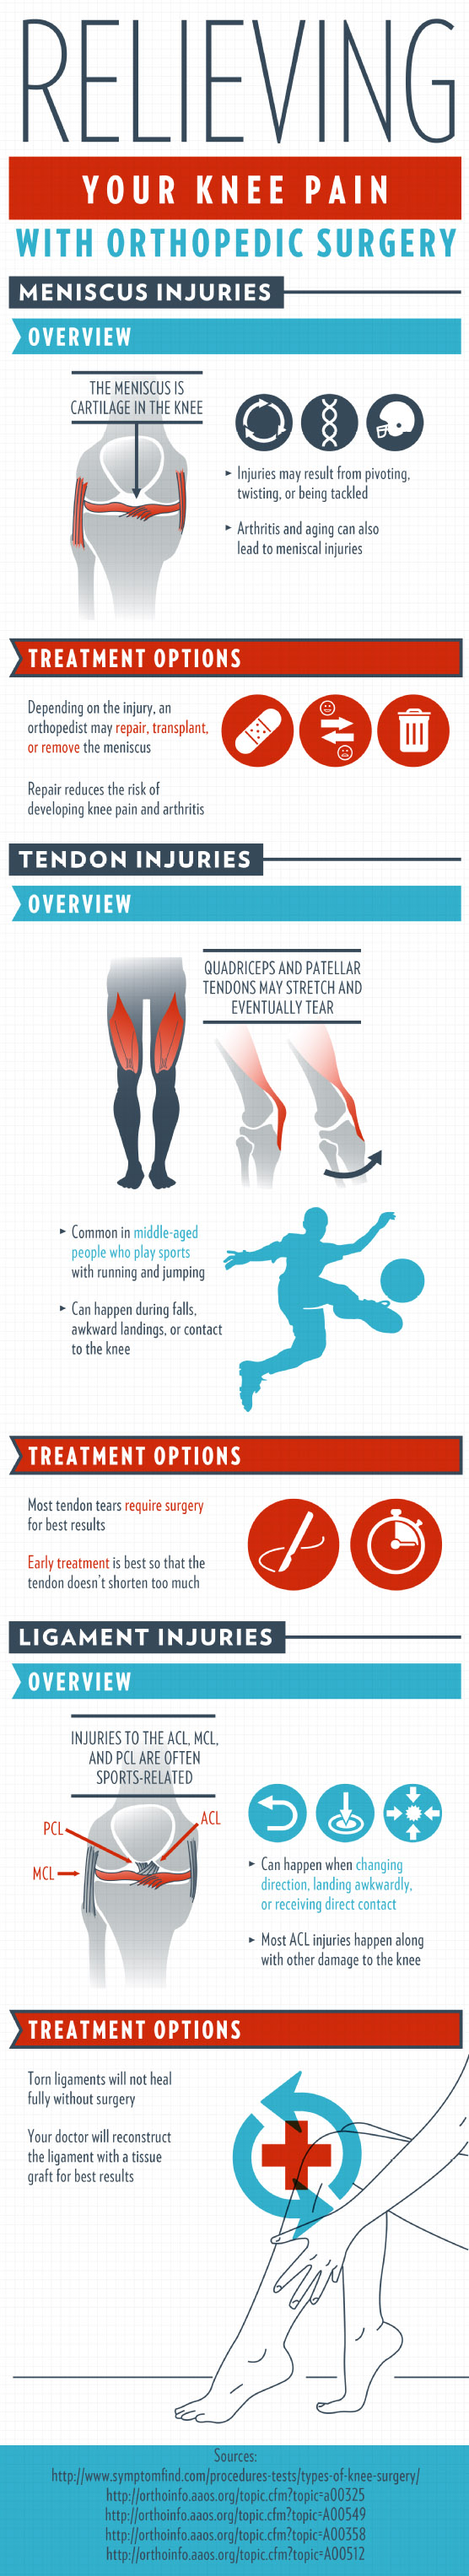 Relieving knee pain with orthopedic surgery